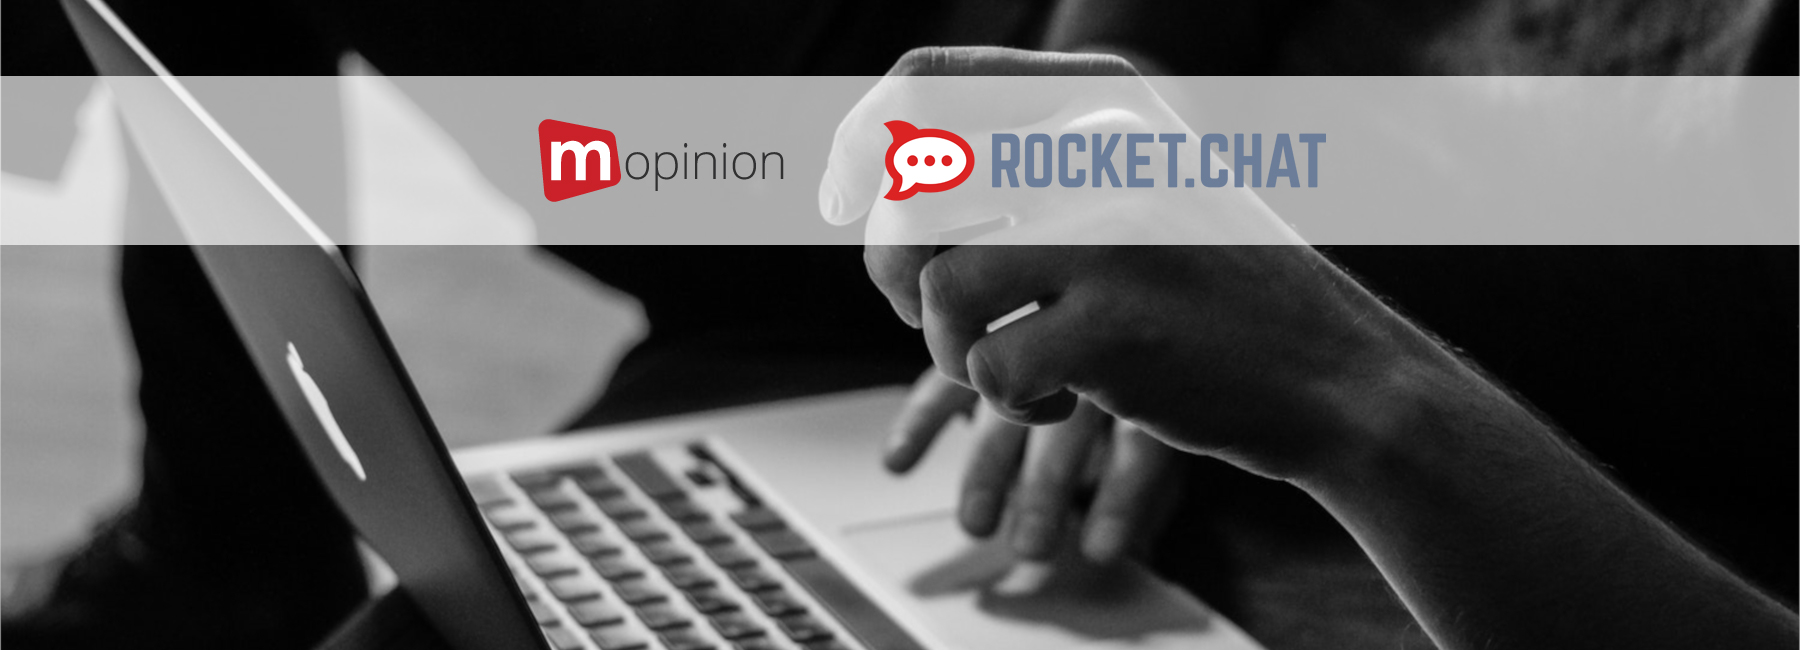 Mopinion now integrates with chat software solution Rocket.Chat